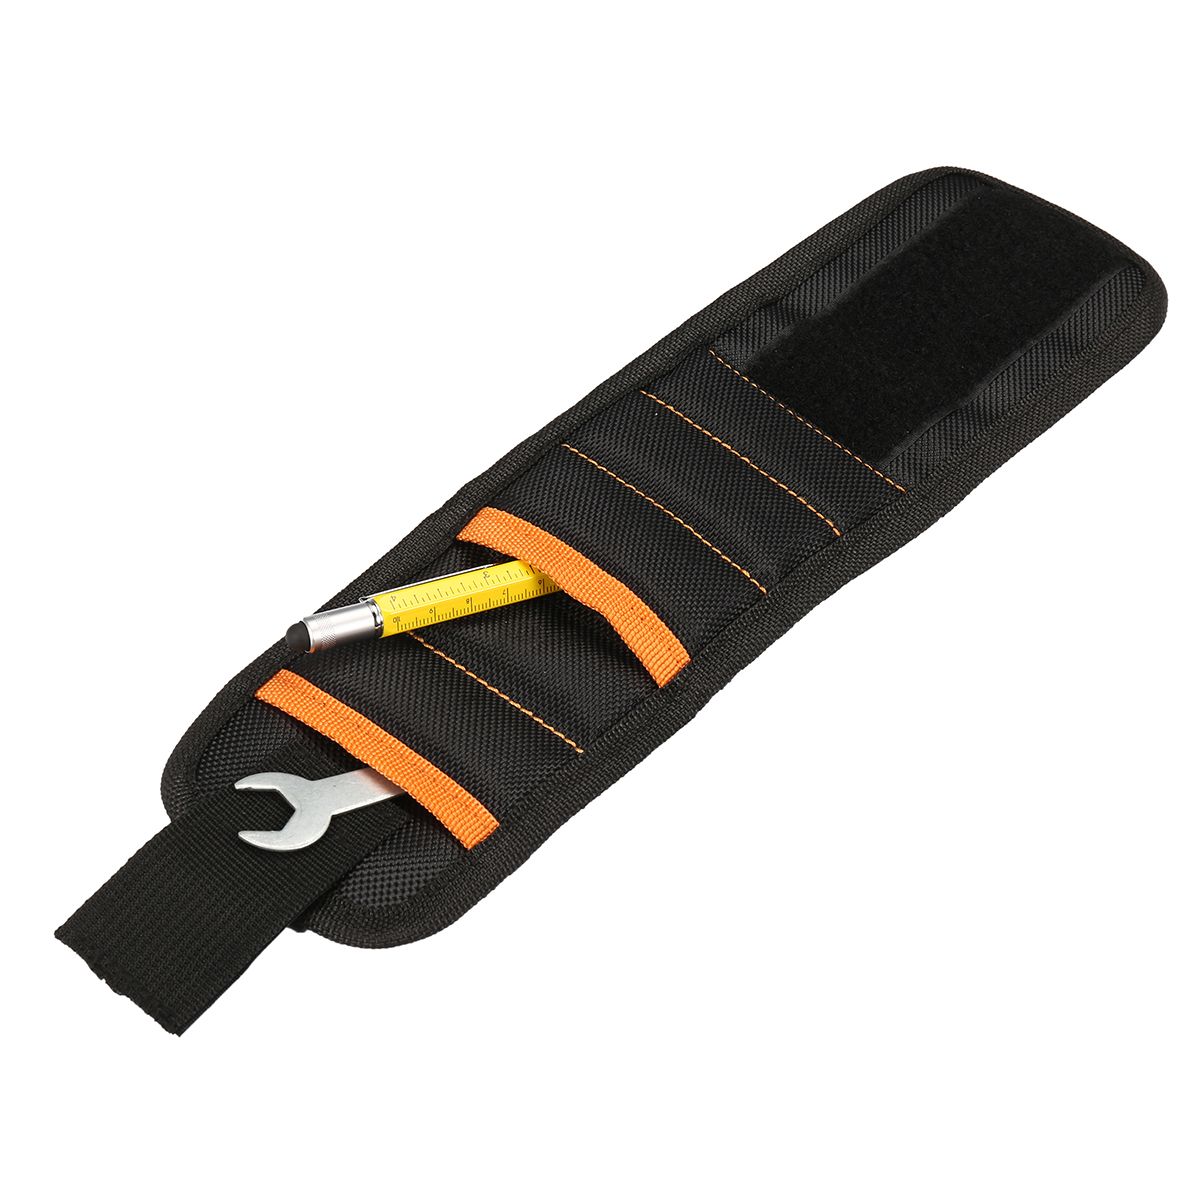 Magnetic-Wristband-Strong-Magnets-Pockets-for-Holding-Tools-Screws-Nails-Drill-Bits-Small-Metal-Part-1262662